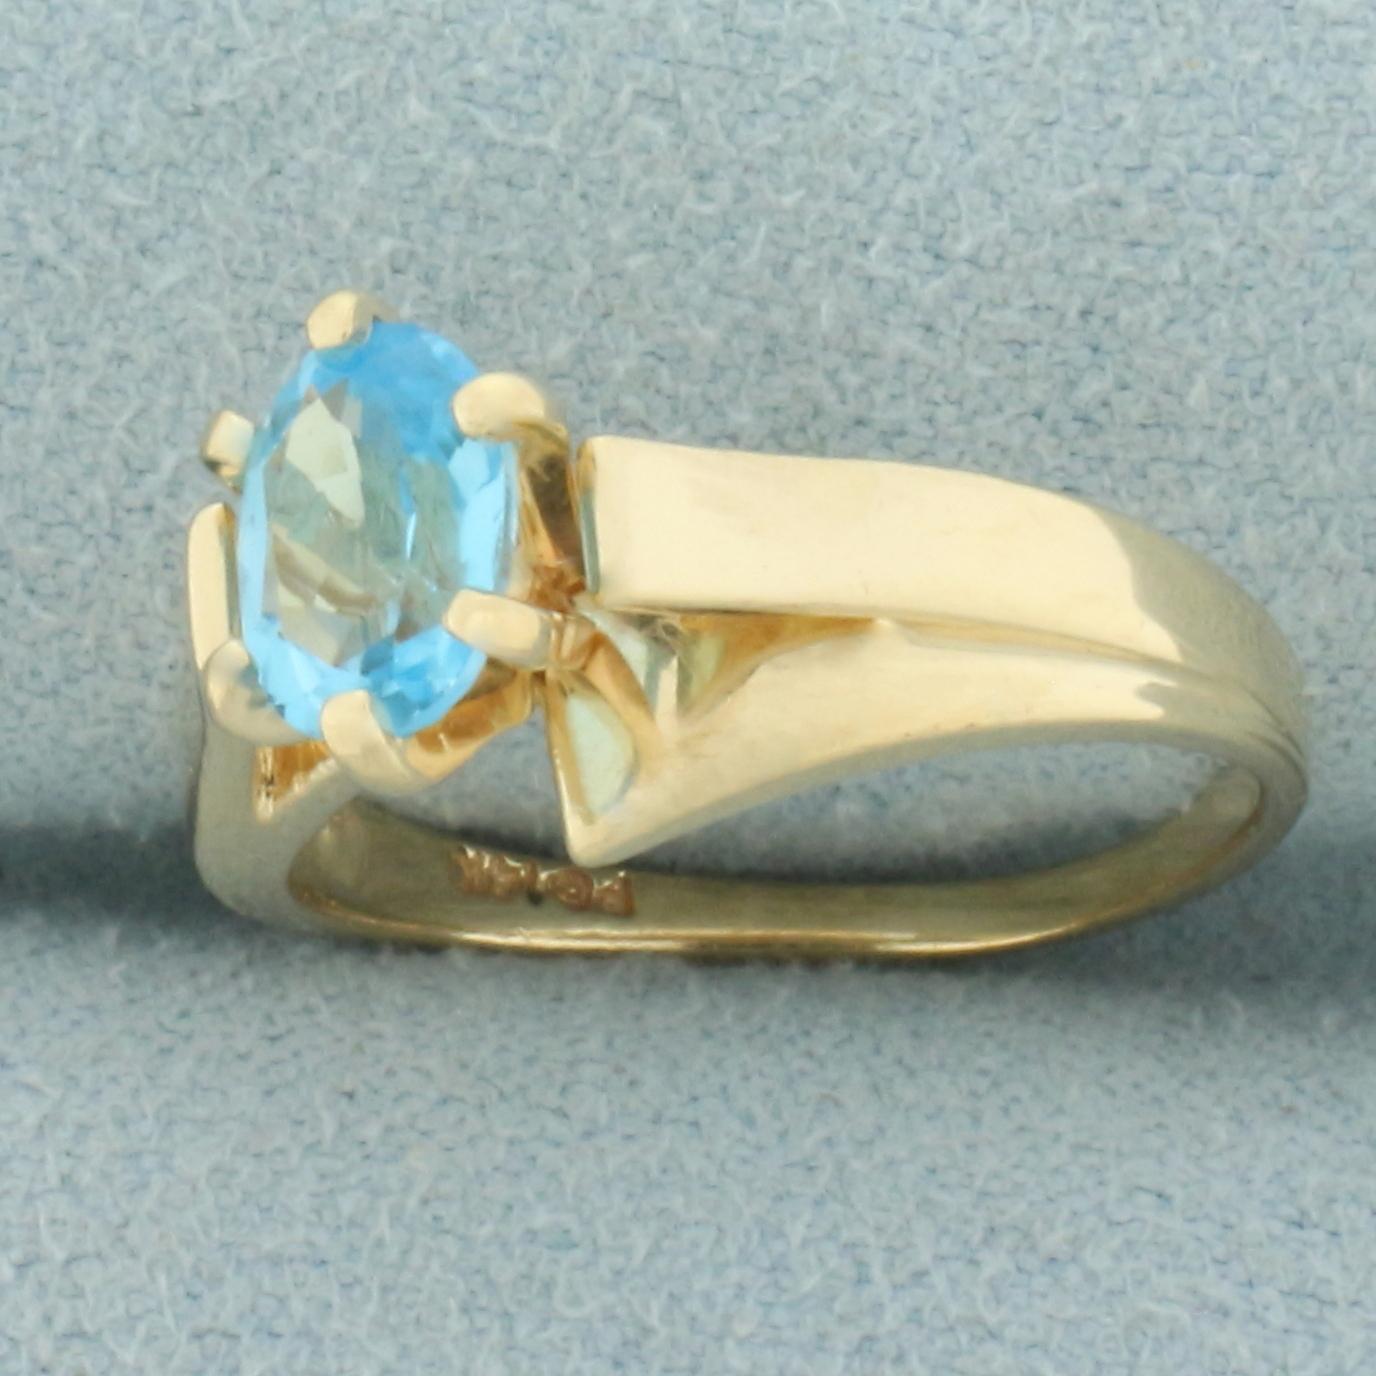 Blue Topaz Solitaire Ring In 14k Yellow Gold